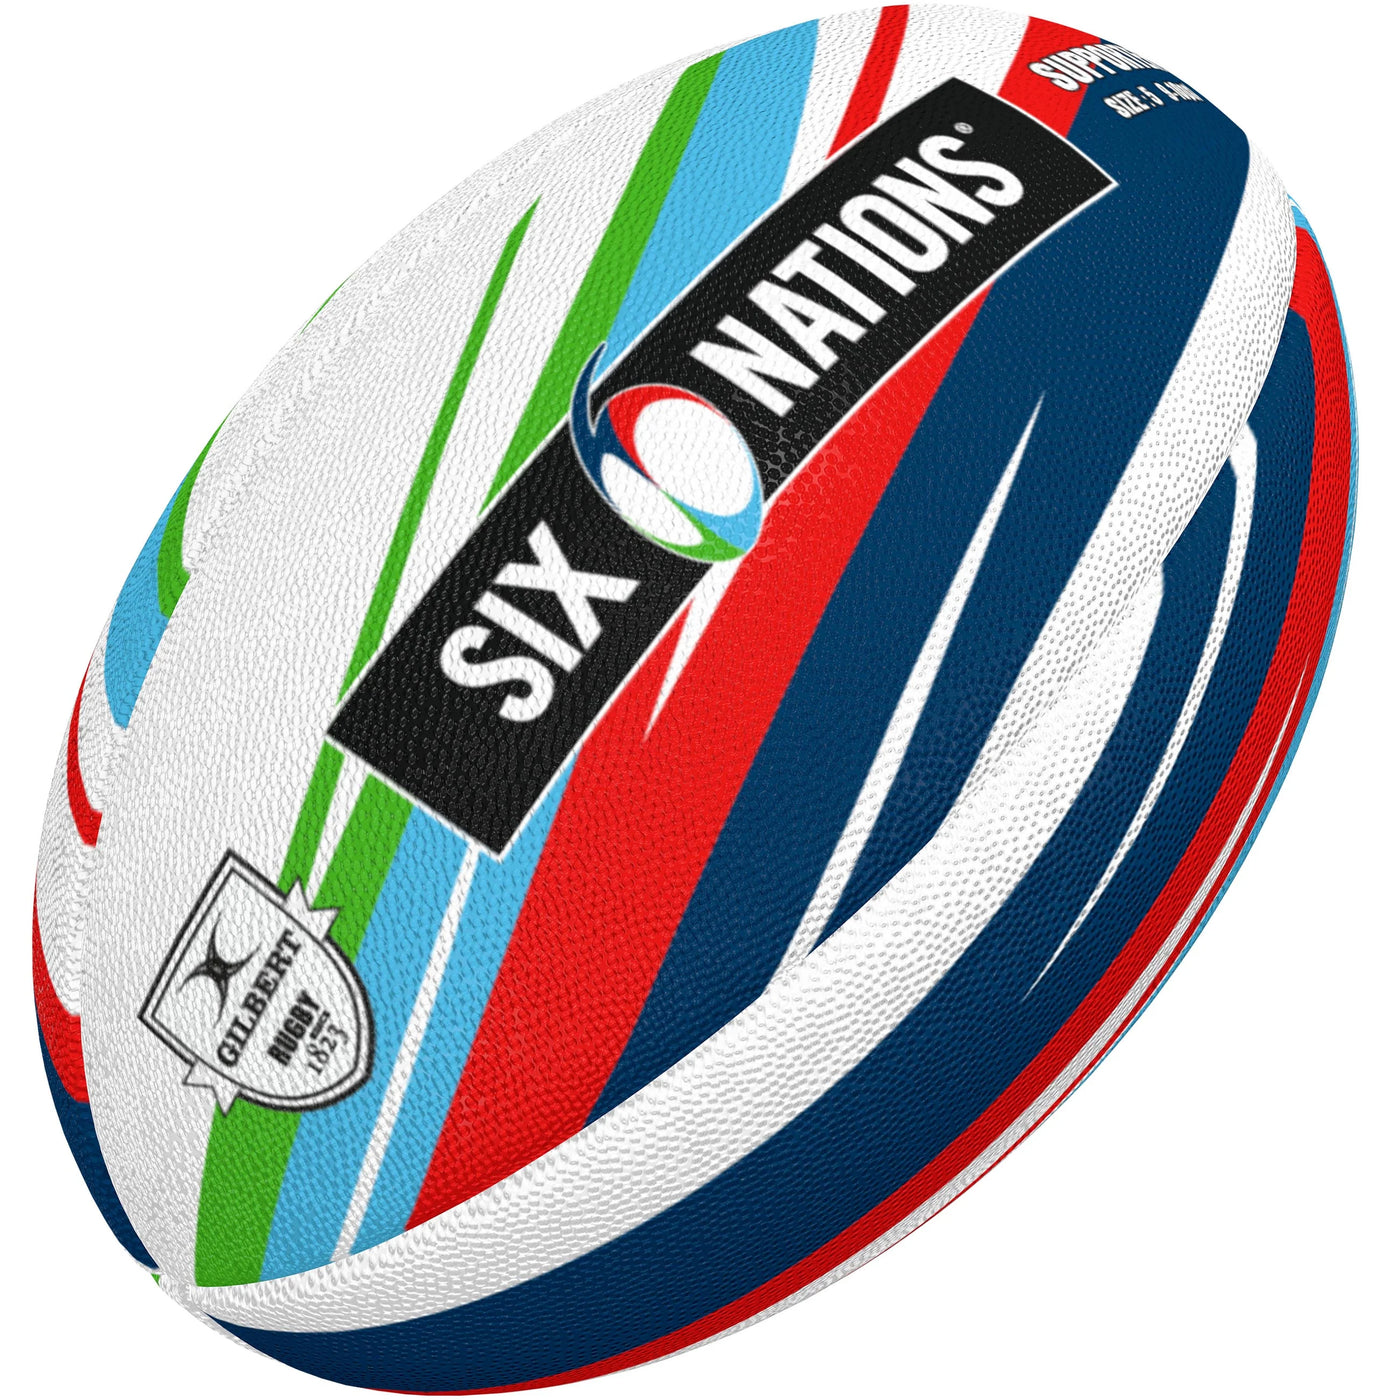 6 Nations Supporter Rugby Ball Size 5